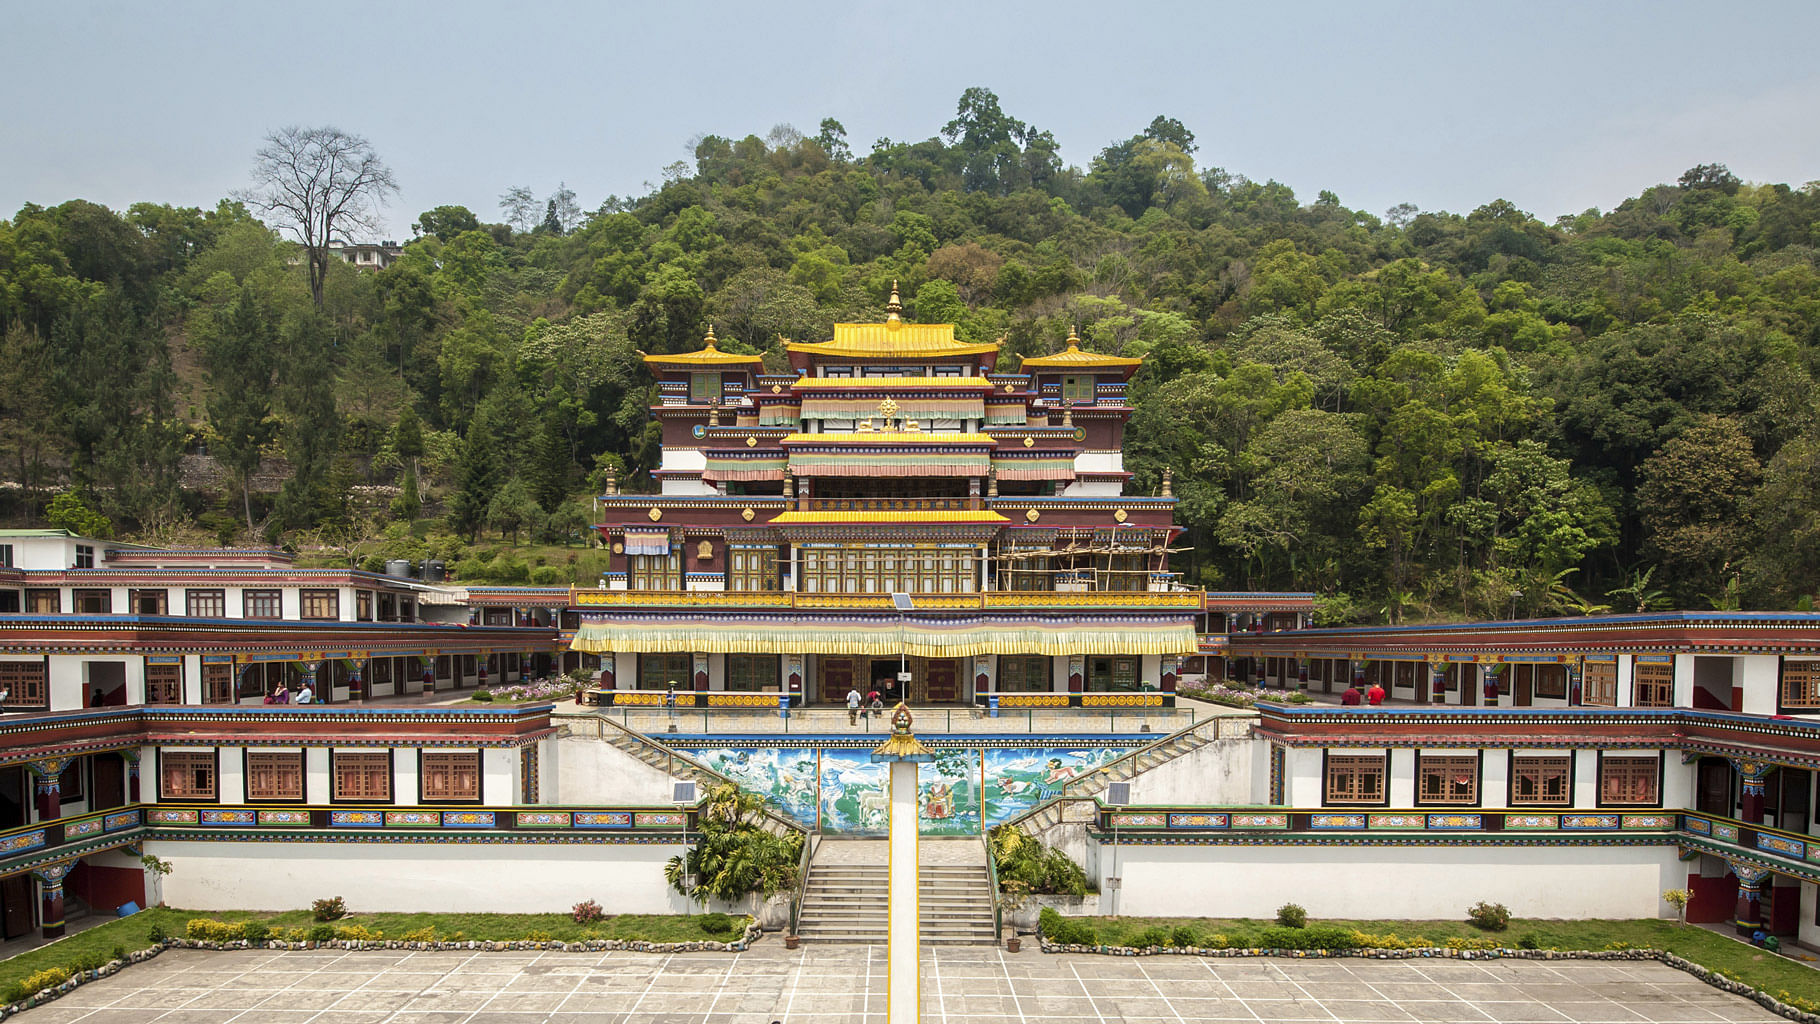 Sikkim is known for its natural beauty, temples and monastries. (Photo: iStockphoto)